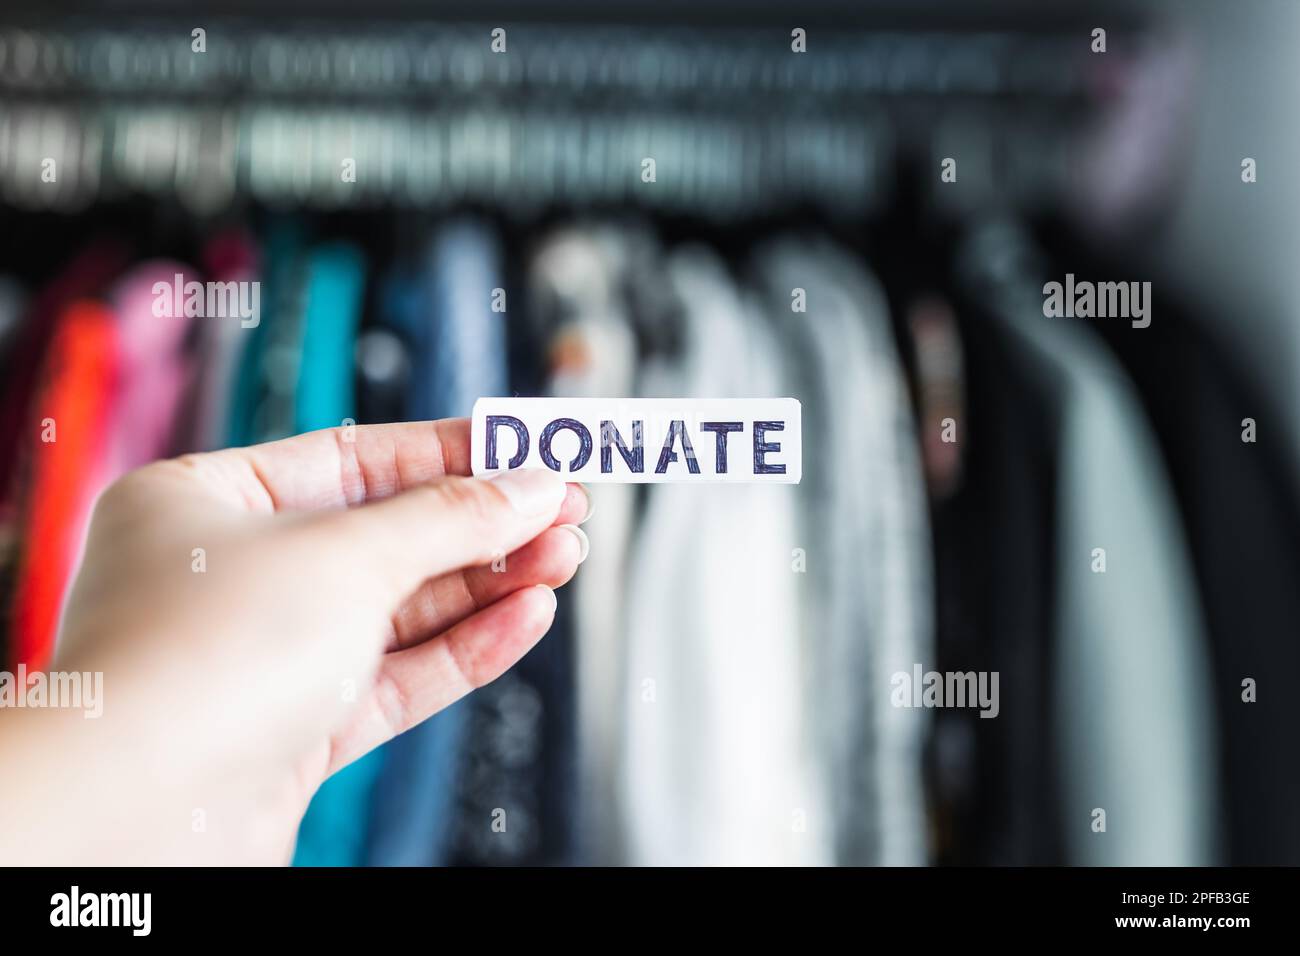 Donate sign held in front of wardrobe full of clothes, concept of excessive shopping and consumerism Stock Photo